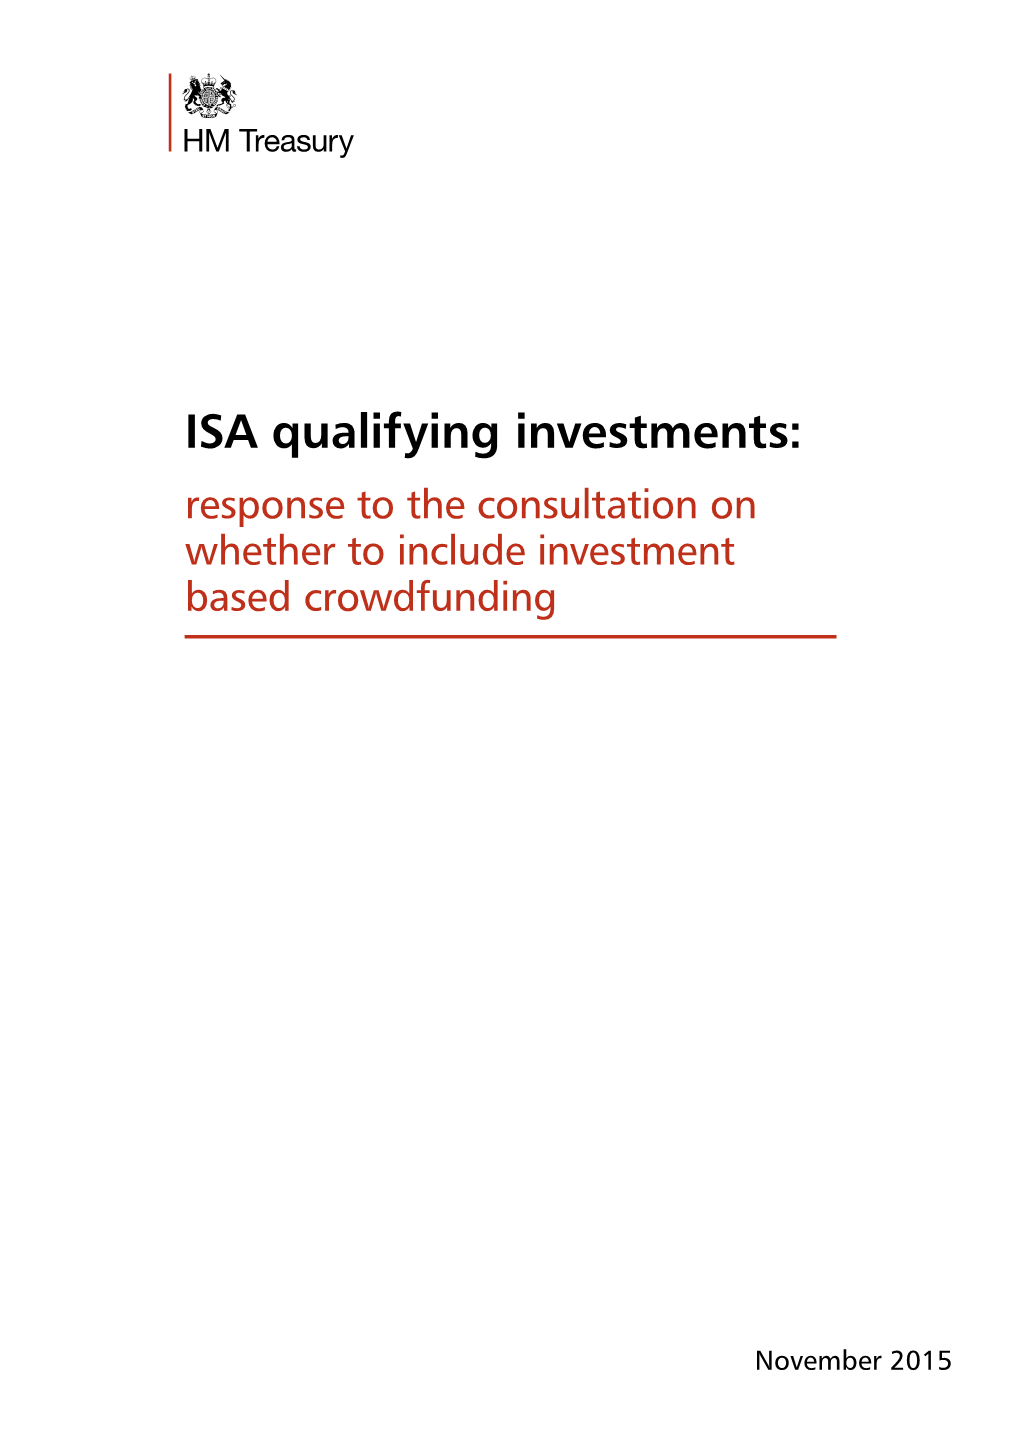 ISA Qualifying Investments: Response to the Consultation on Whether to Include Investment Based Crowdfunding